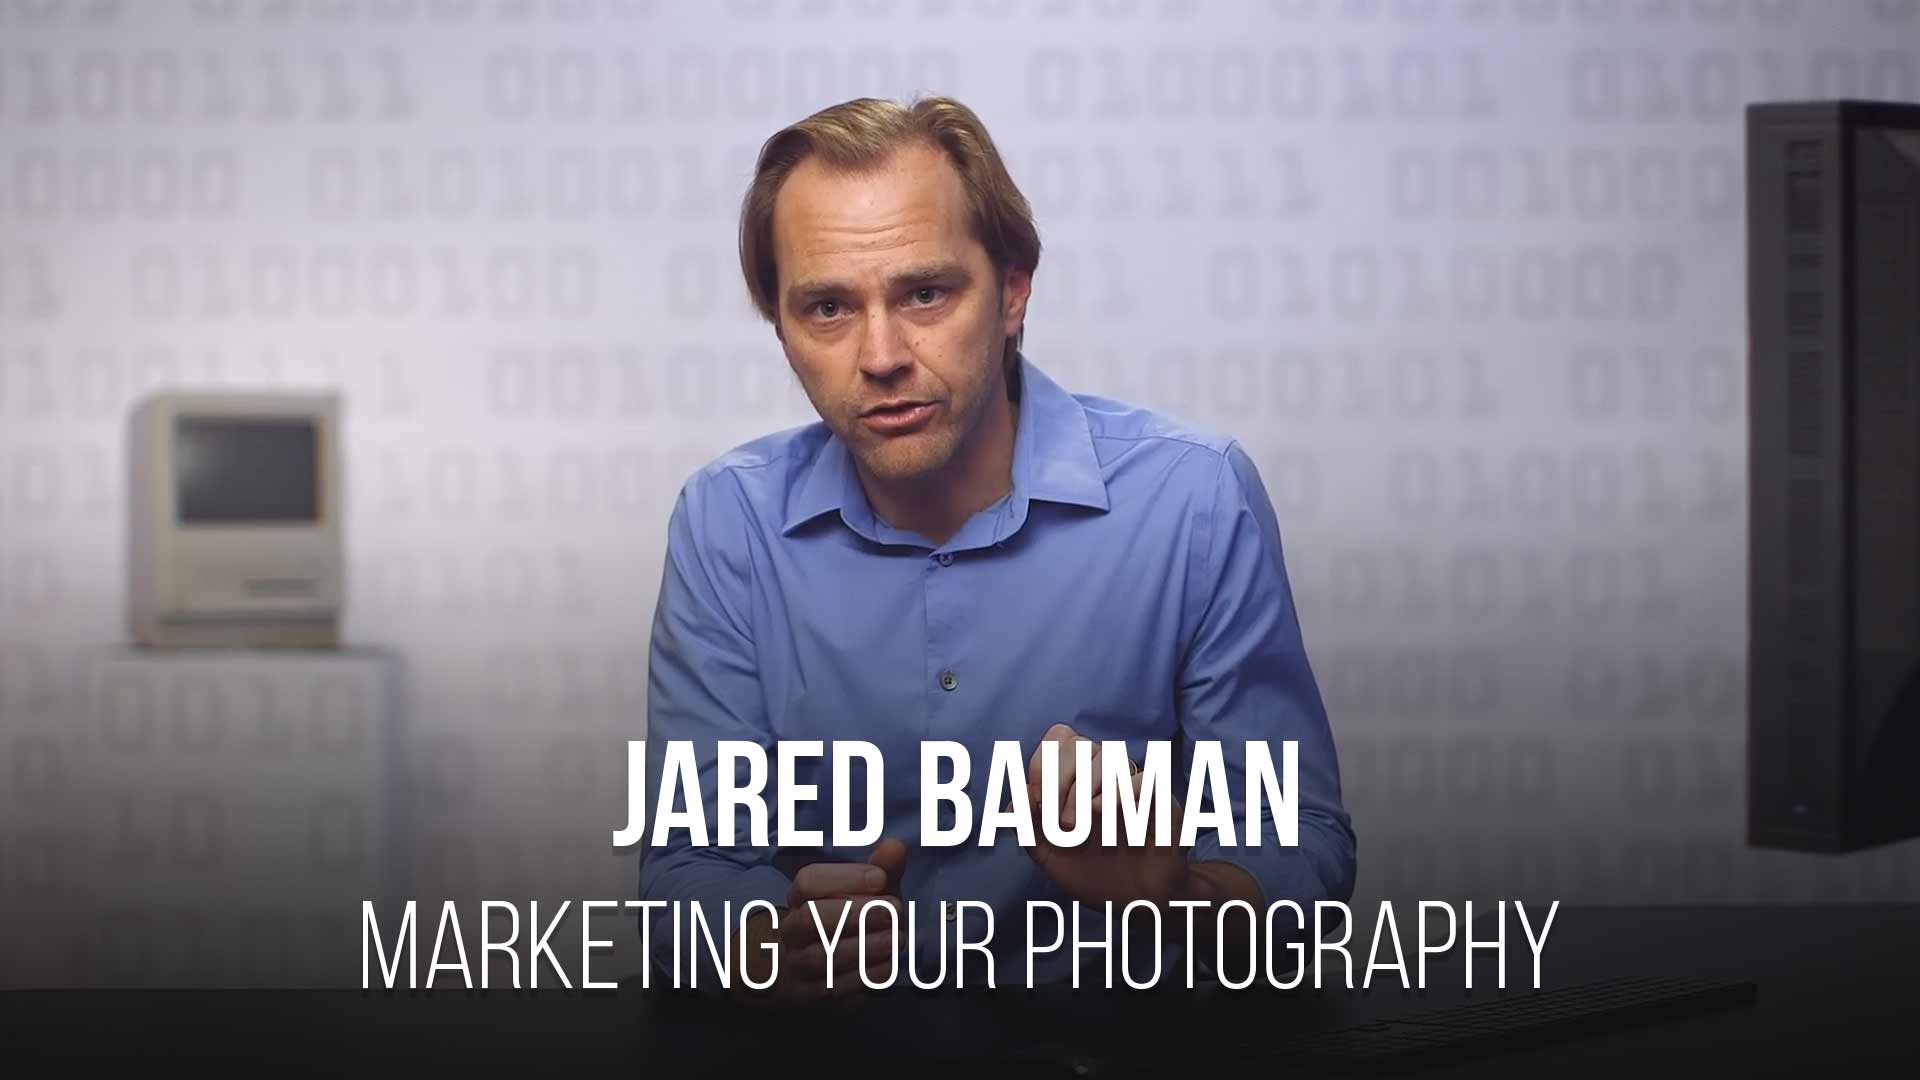 Jared Bauman is a professional photographer, PRO EDU instructor, and digital marketing expert in photography.